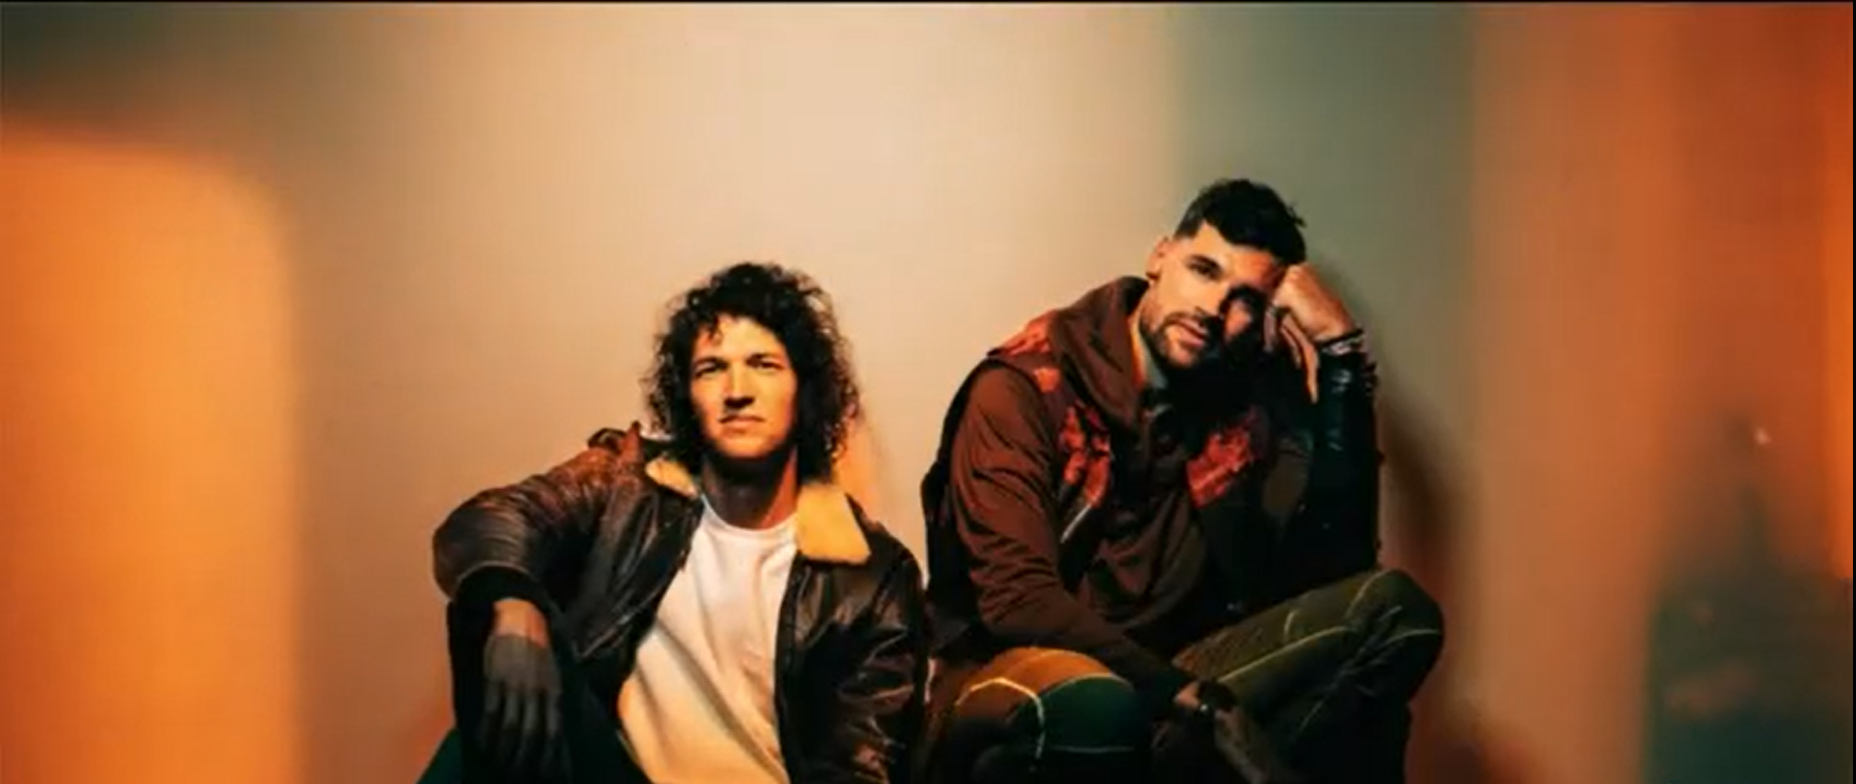 King & Country brings its ‘A Drummer Boy Christmas’ tour to Indianapolis next week